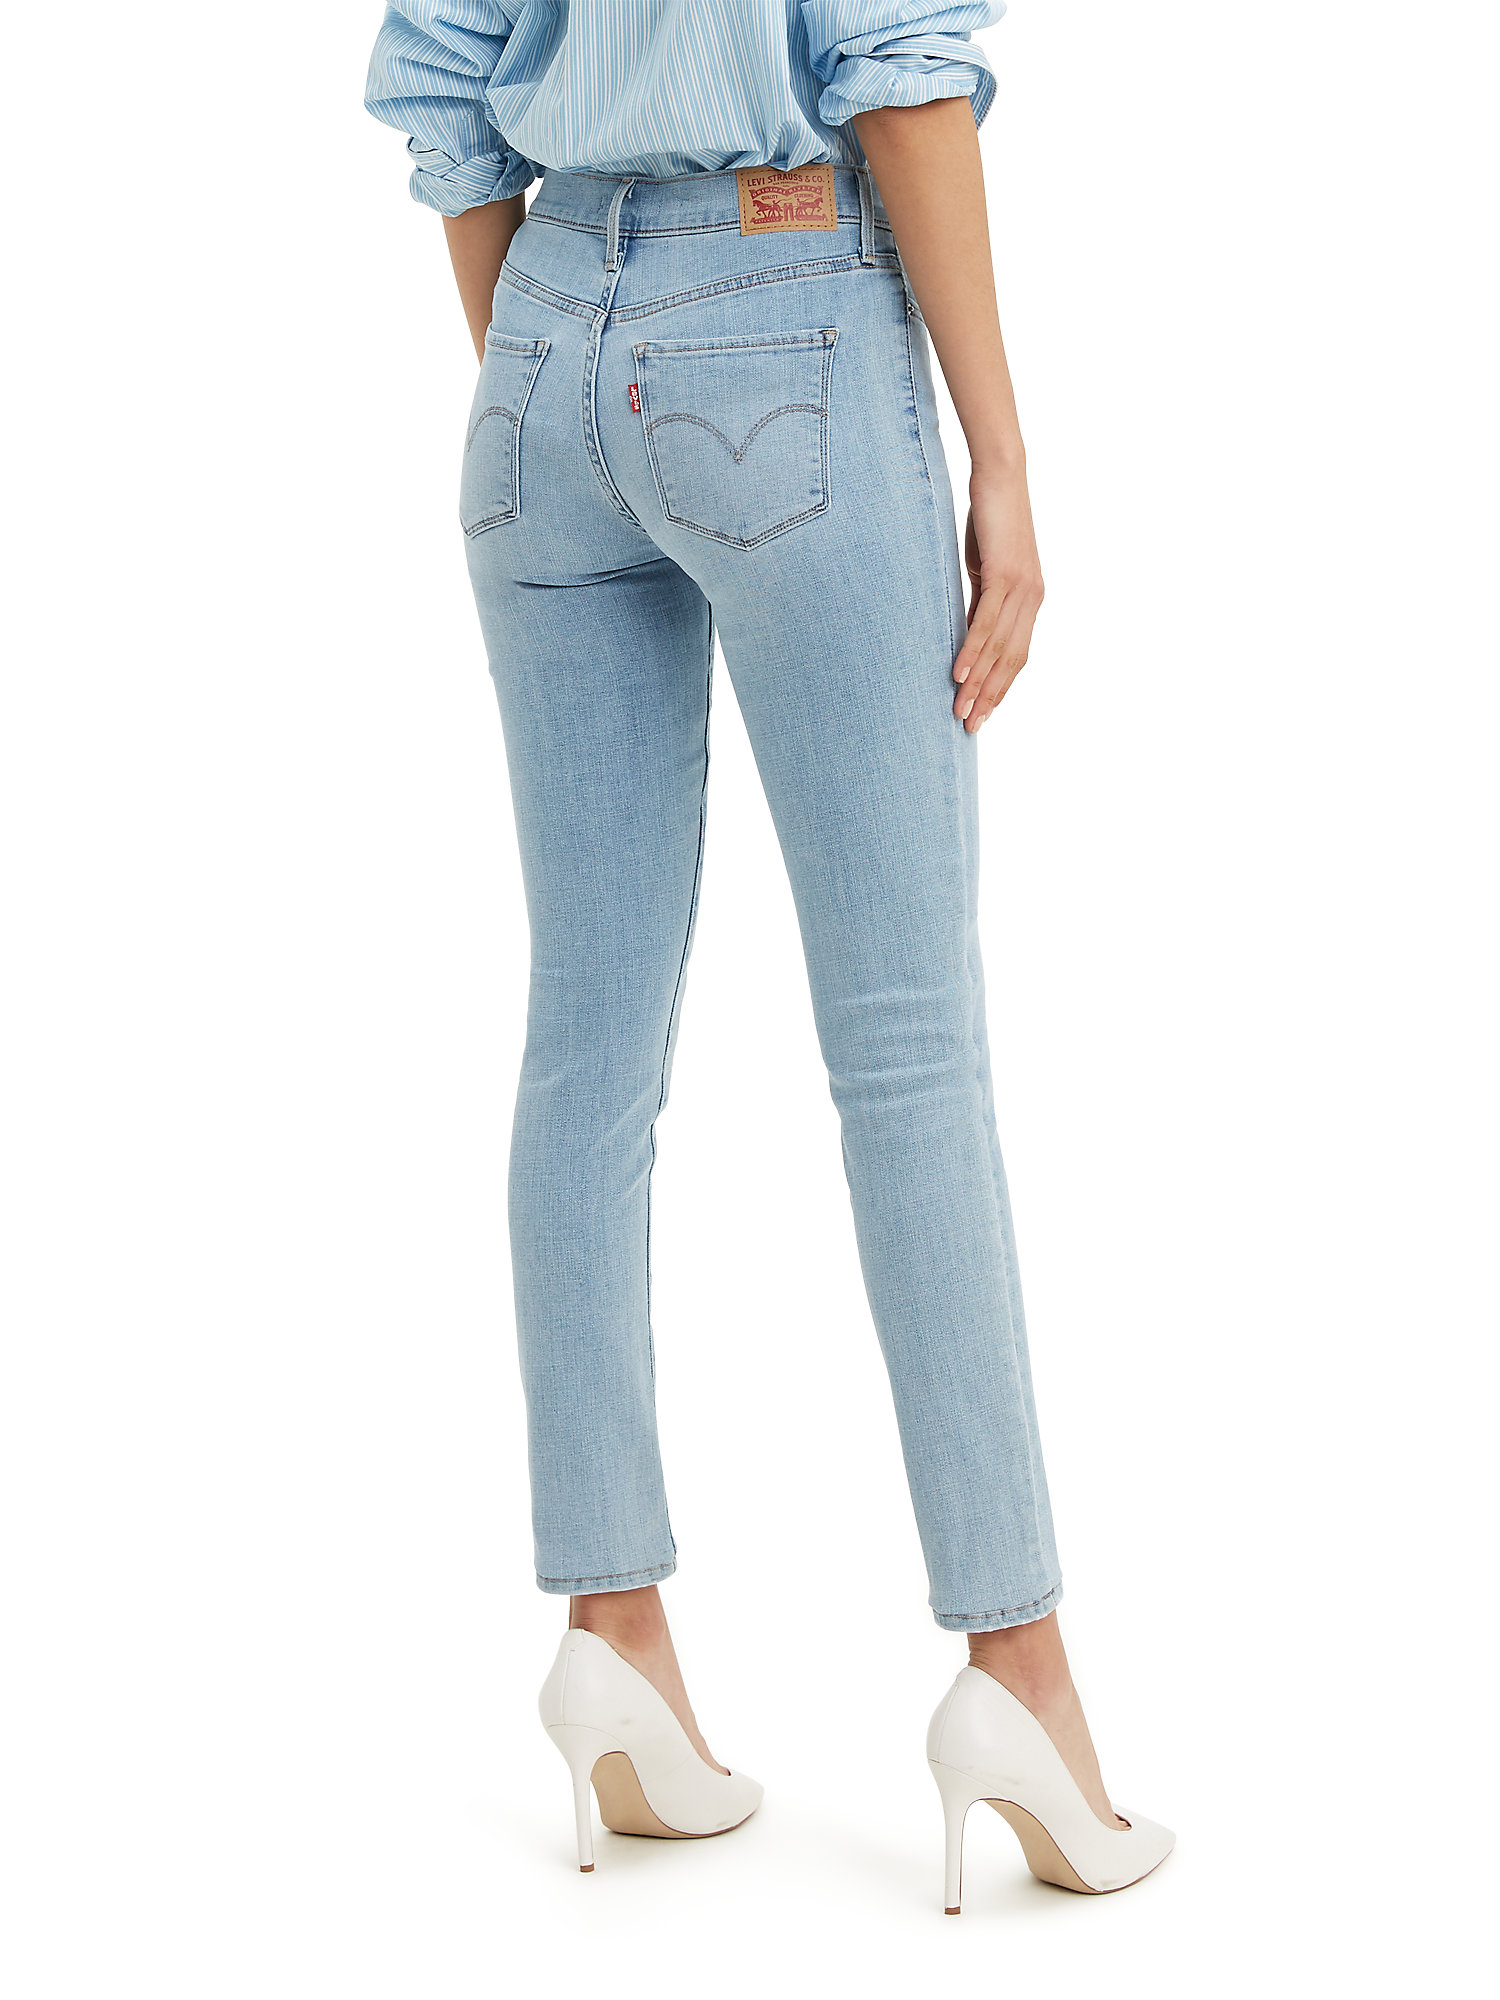 Levi’s Original Red Tab Women's 311 Shaping Skinny Jeans - image 4 of 6